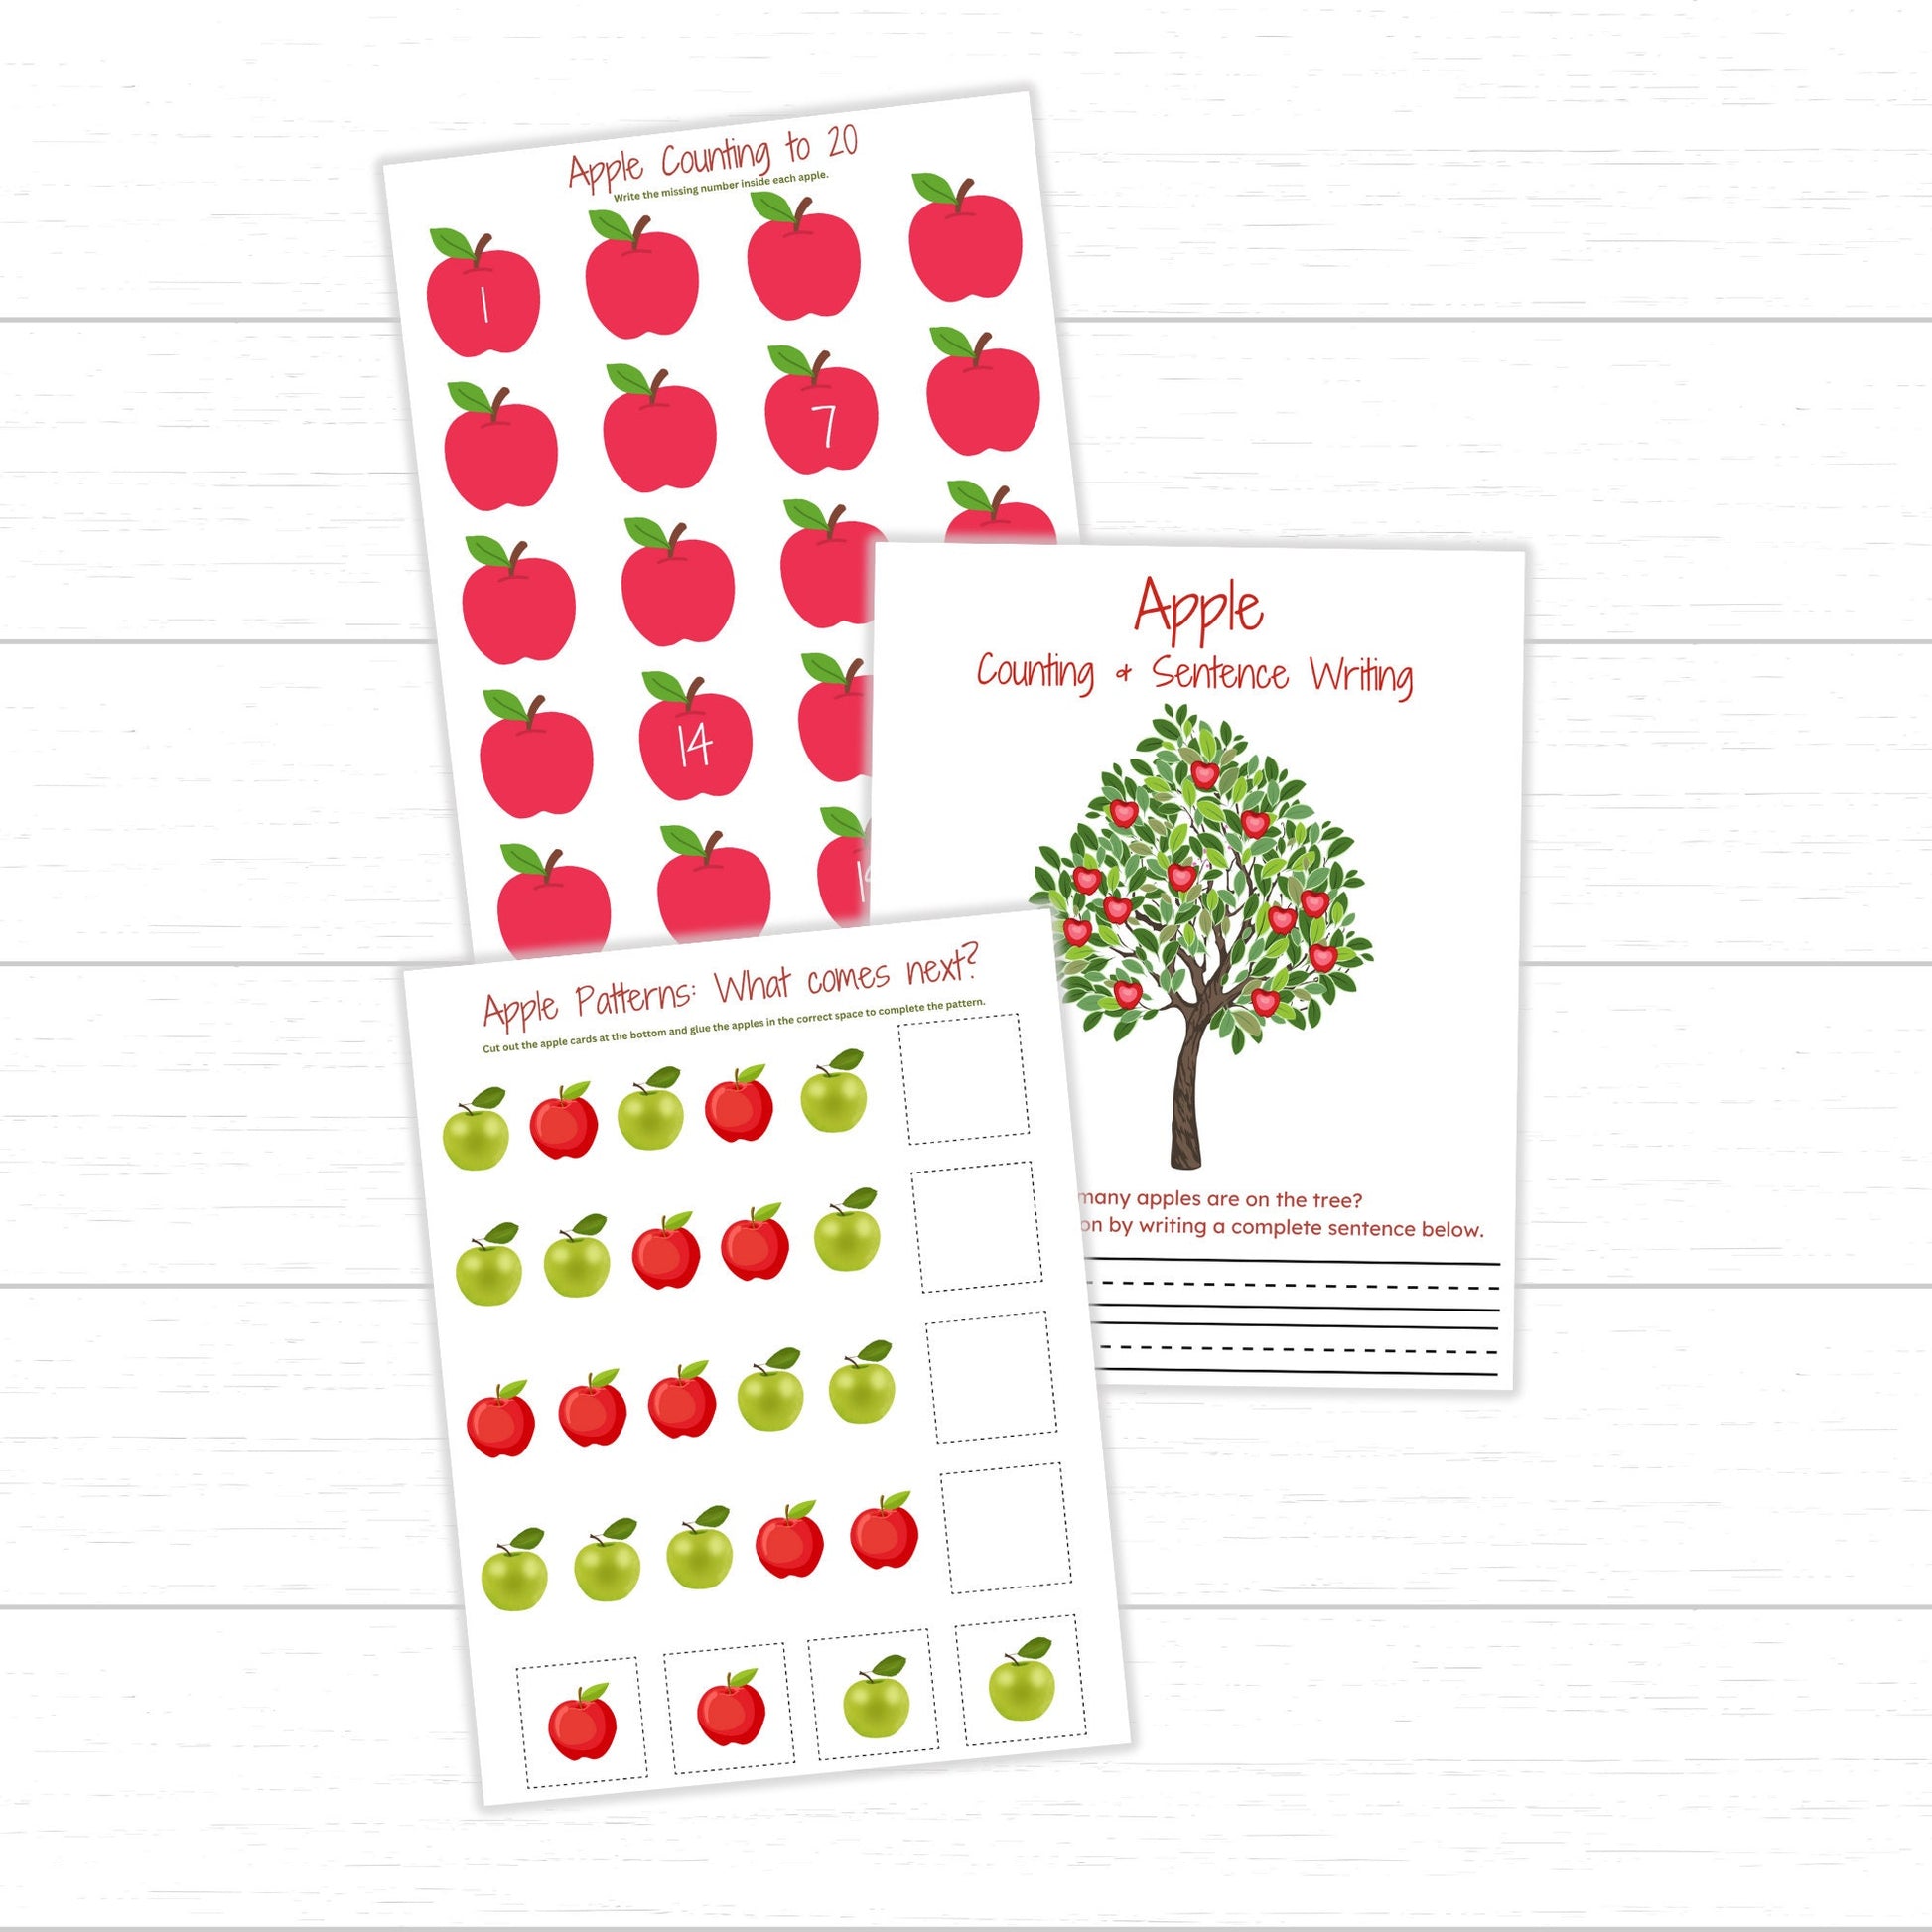 Apple Activity Pack for Kids, Printable Learning Bundle, Apple Worksheets, Apple Printable, Printable Apple Unit, Apple Unit Study, Apples